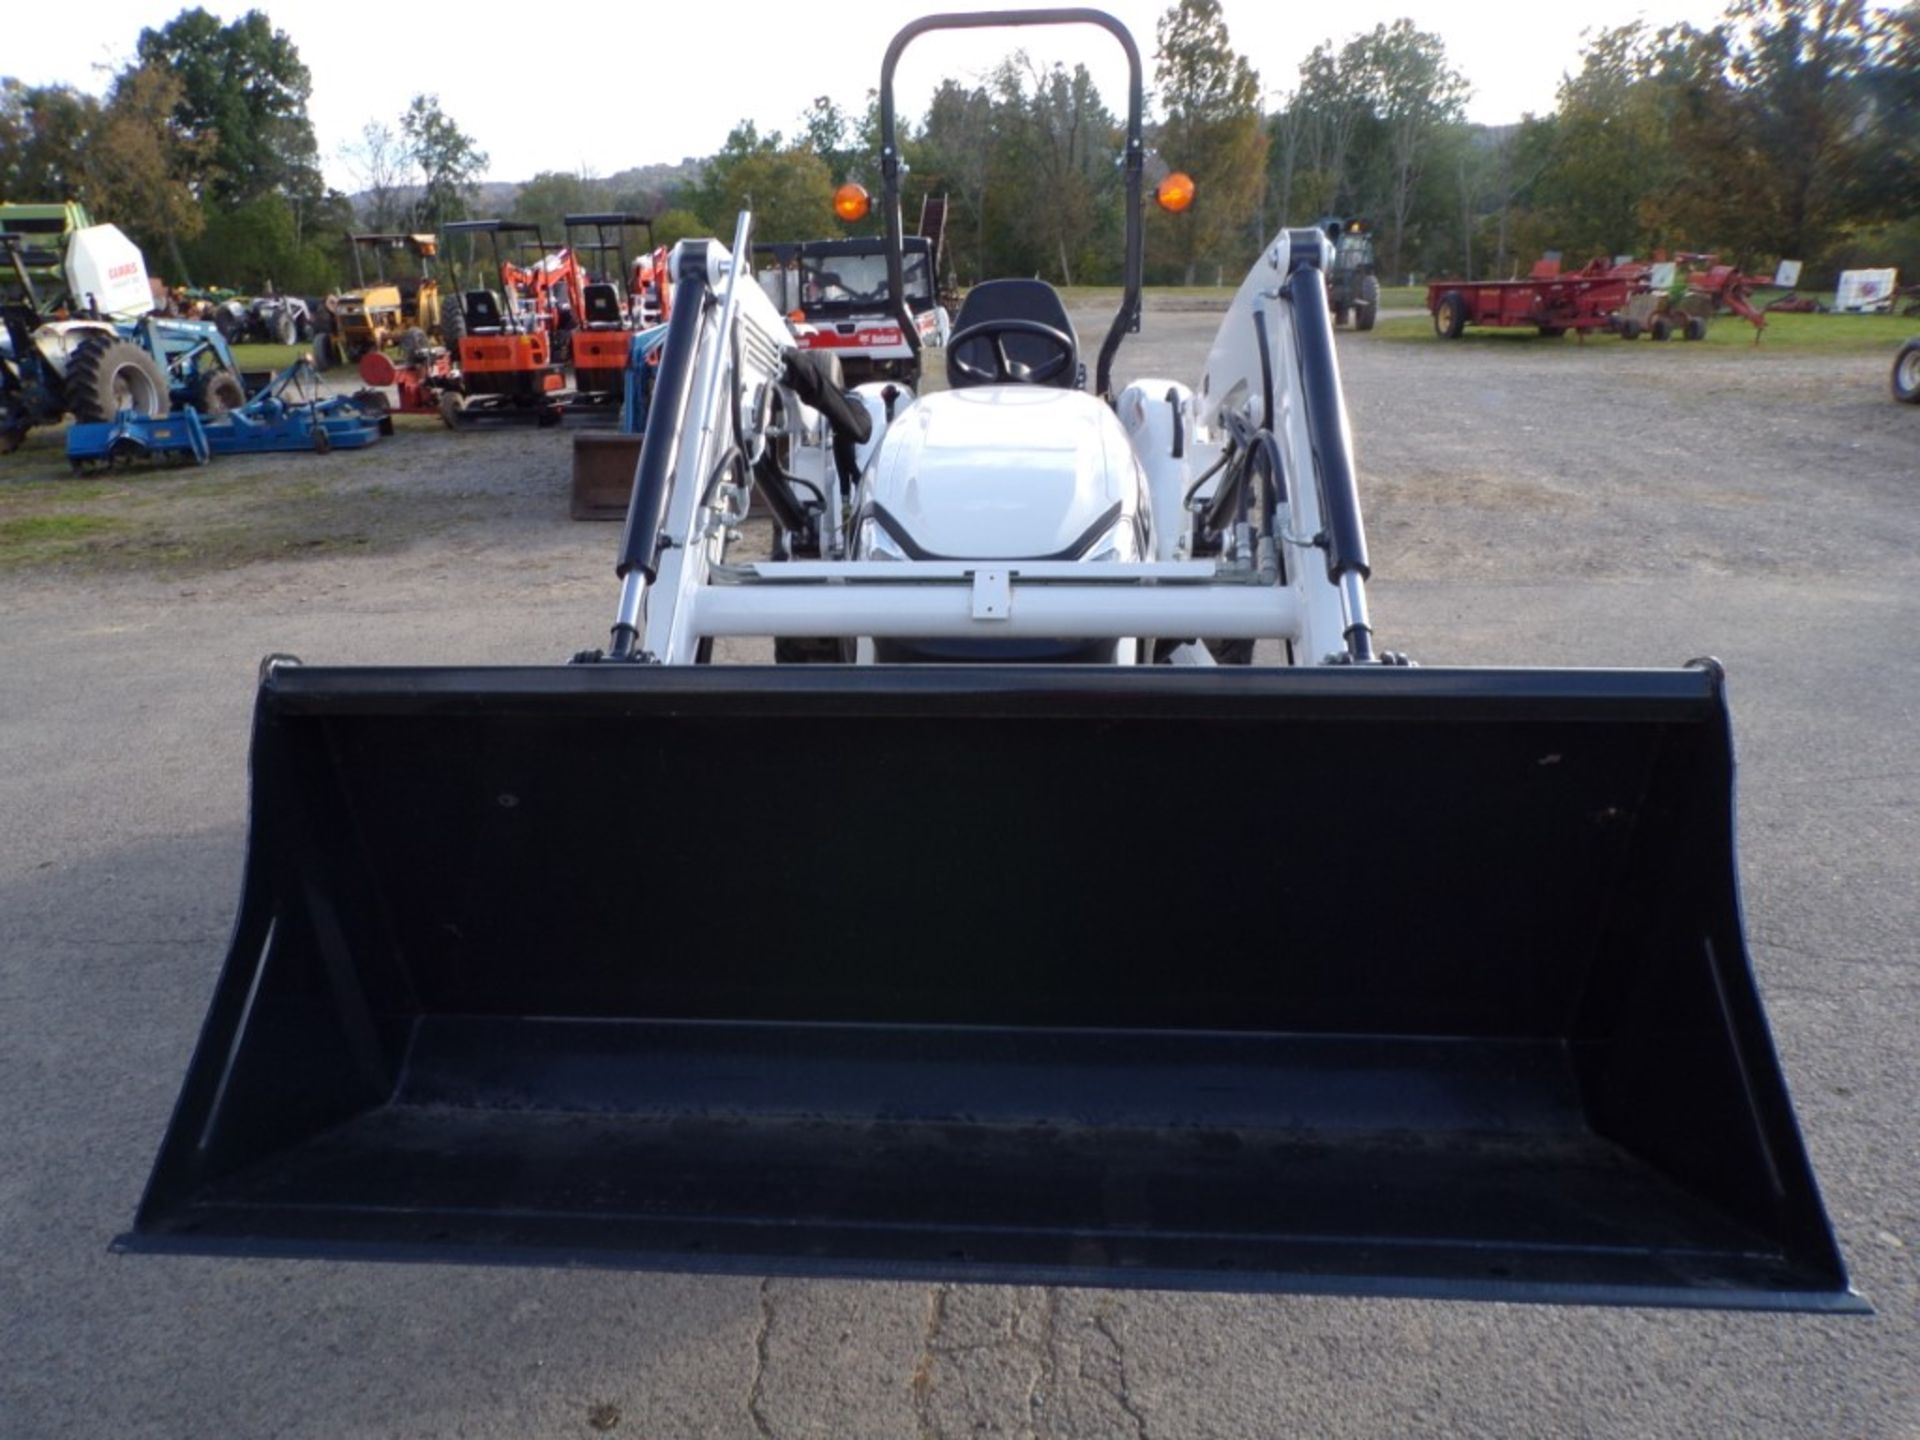 Demo Bobcat CT2035, 4 WD, Compact Tractor with Loader, Hydro Trans. SLL Bjet Coupler, 2 Hrs, Sells - Image 4 of 5